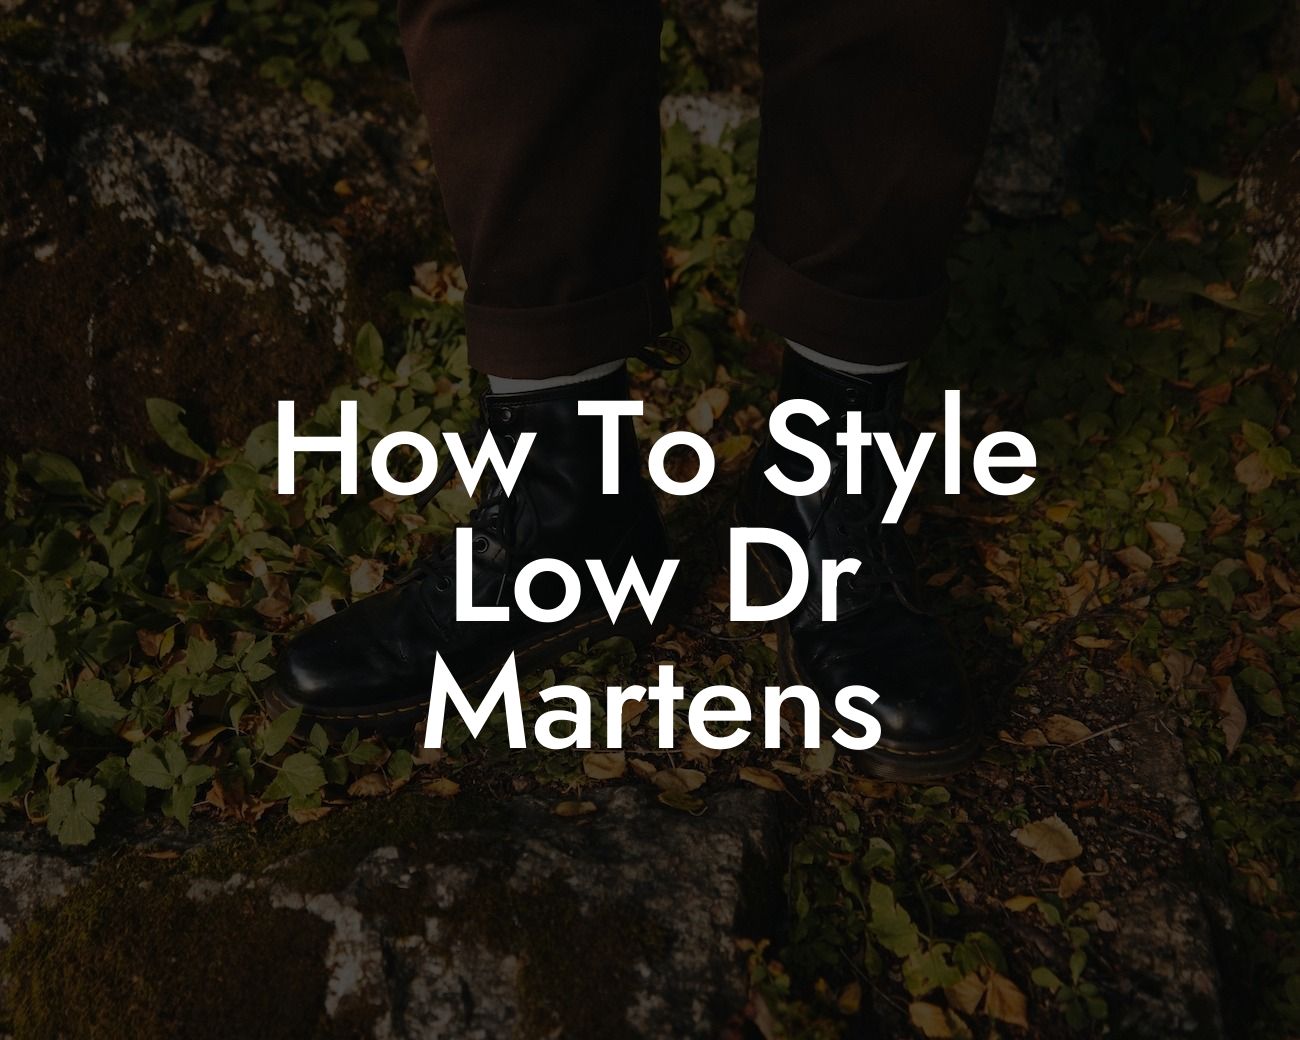 How To Style Low Dr Martens